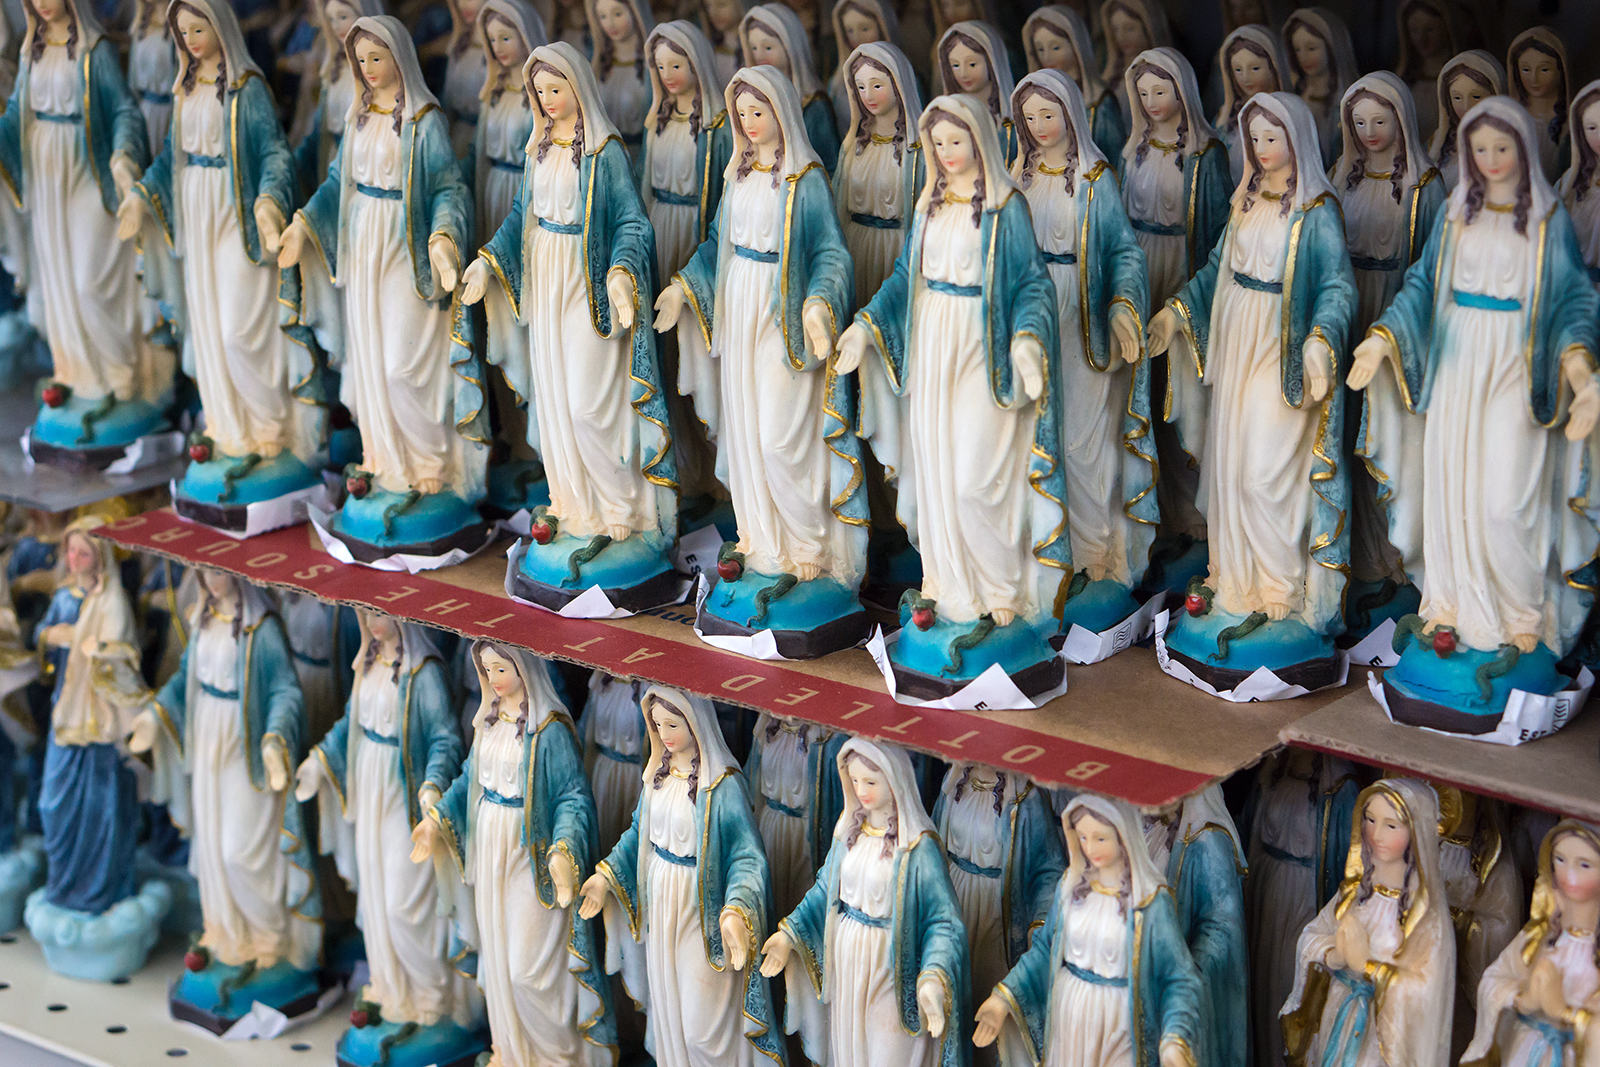 Statuettes of the Virgin Mary on display. Photo by Thom Masat/Unsplash/Creative Commons